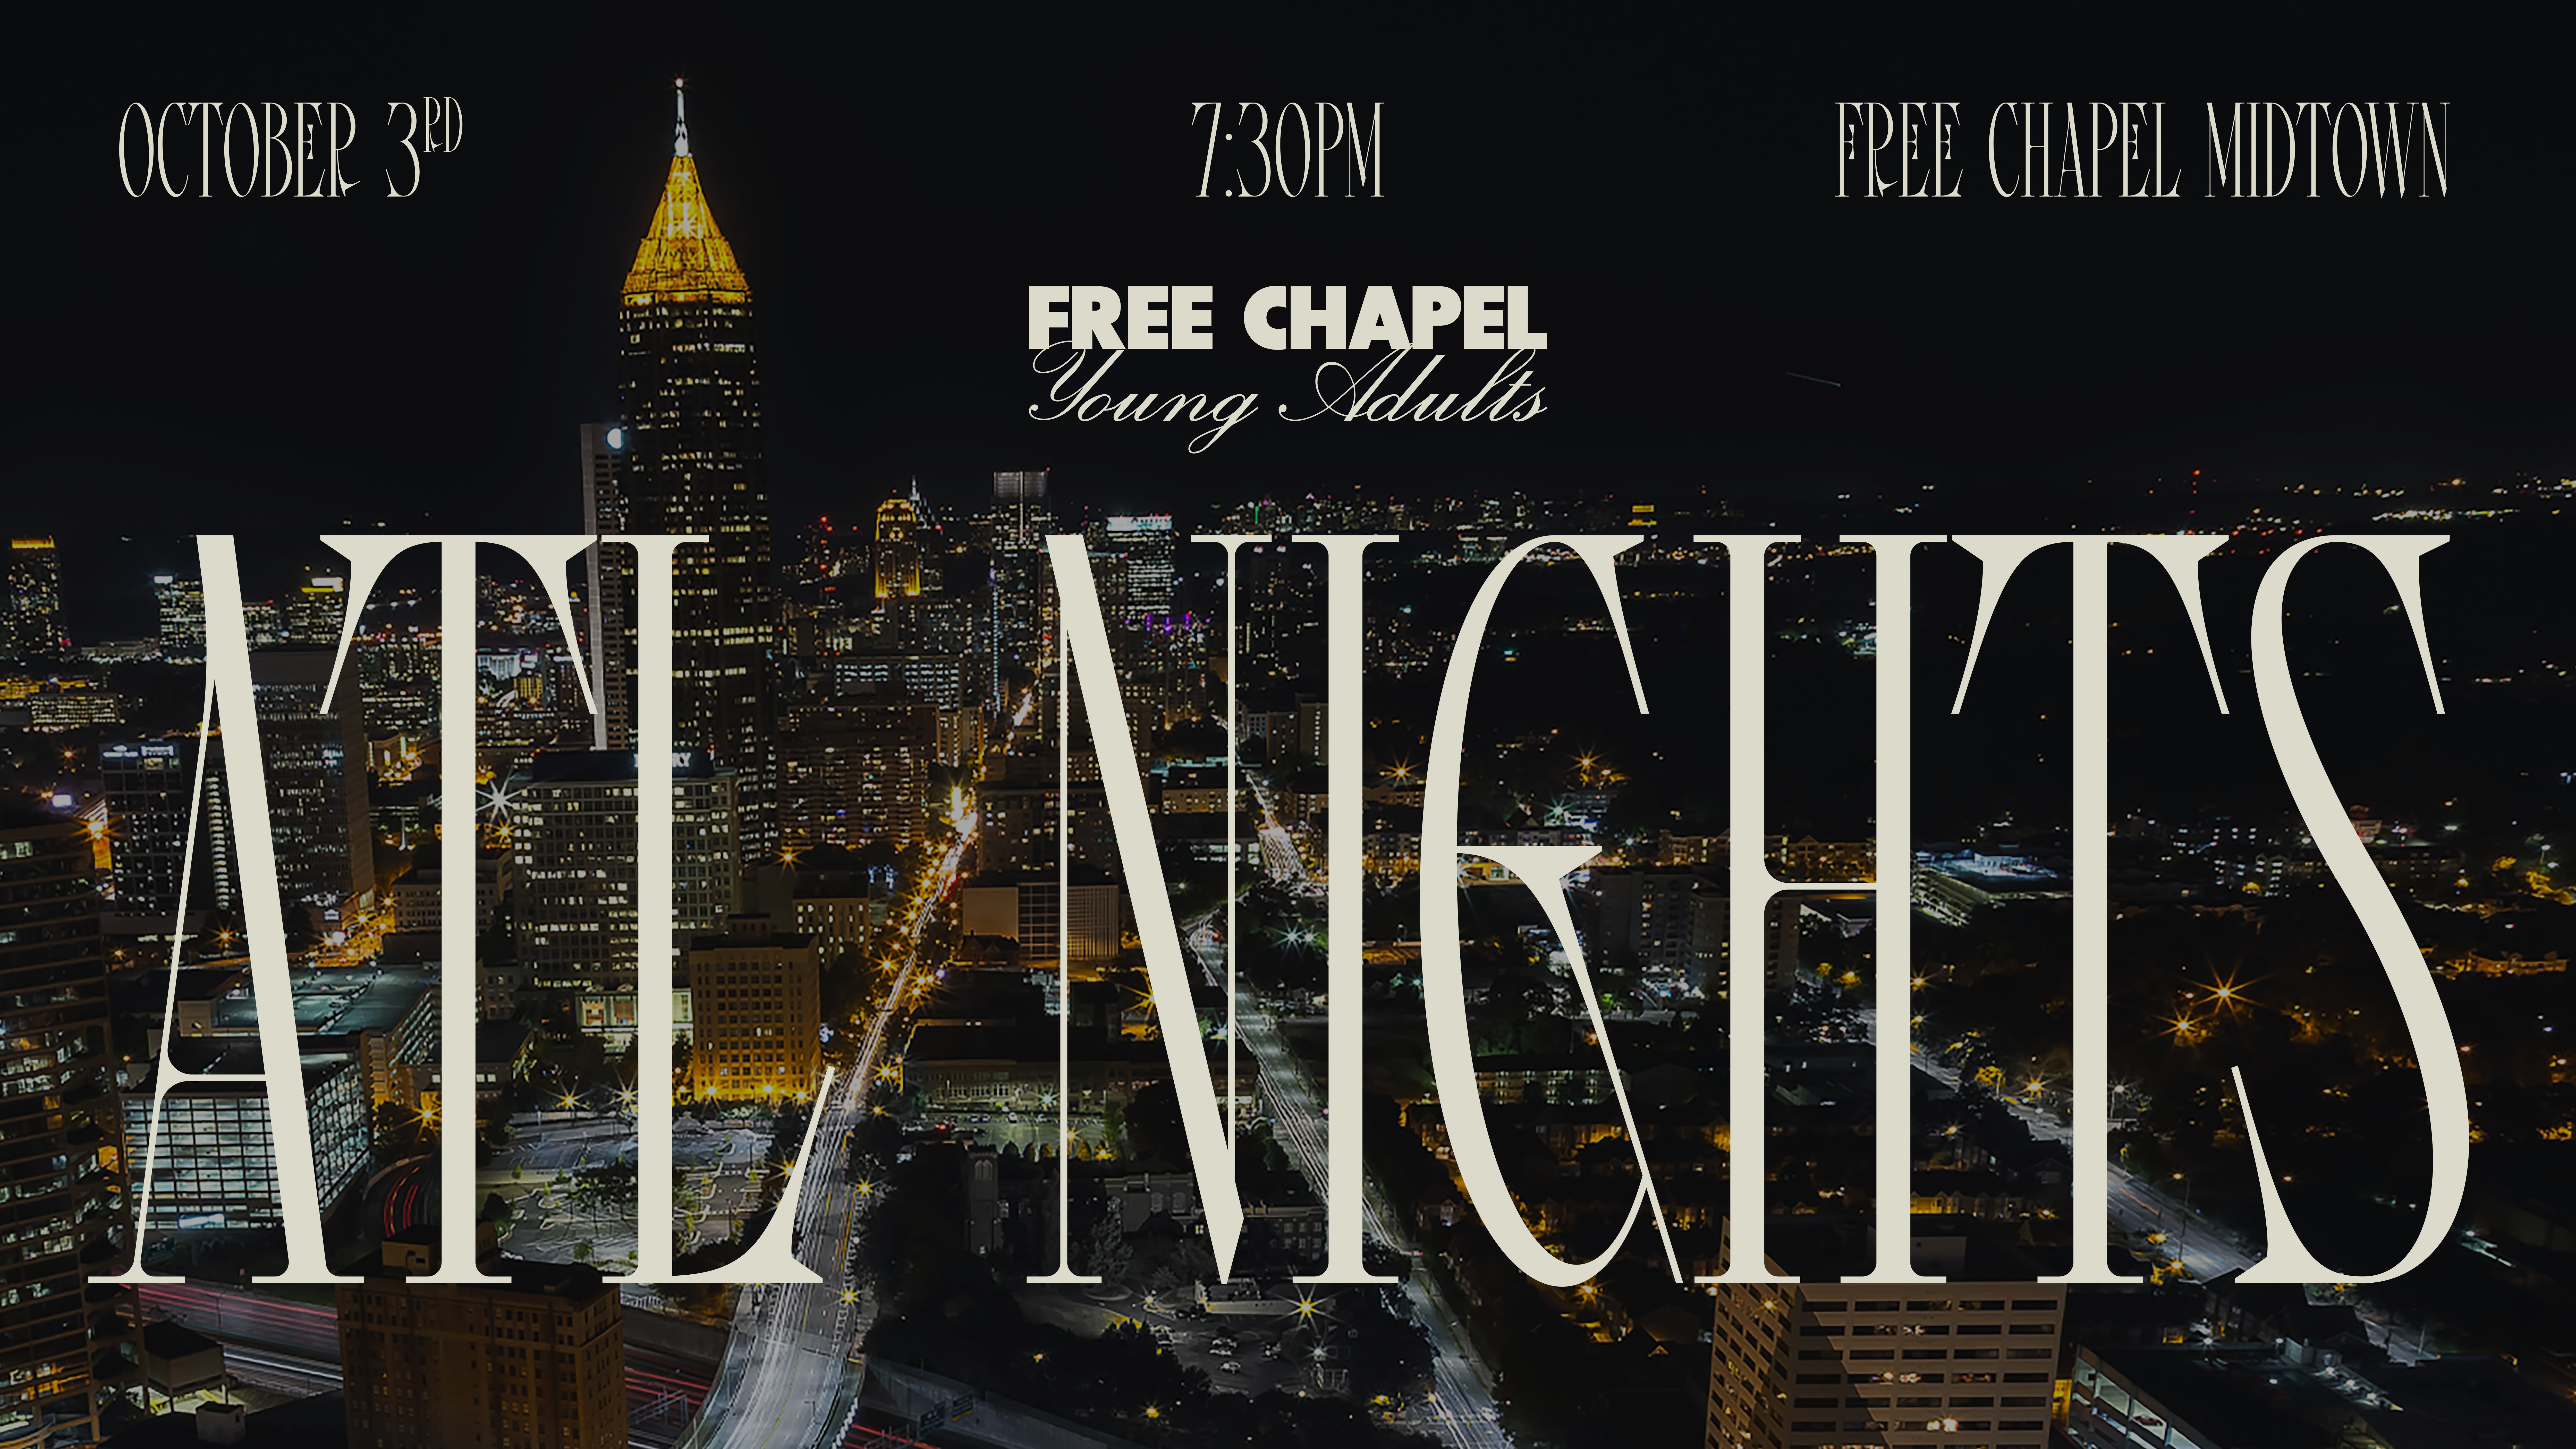 FCYA ATL Nights  at the Midtown campus